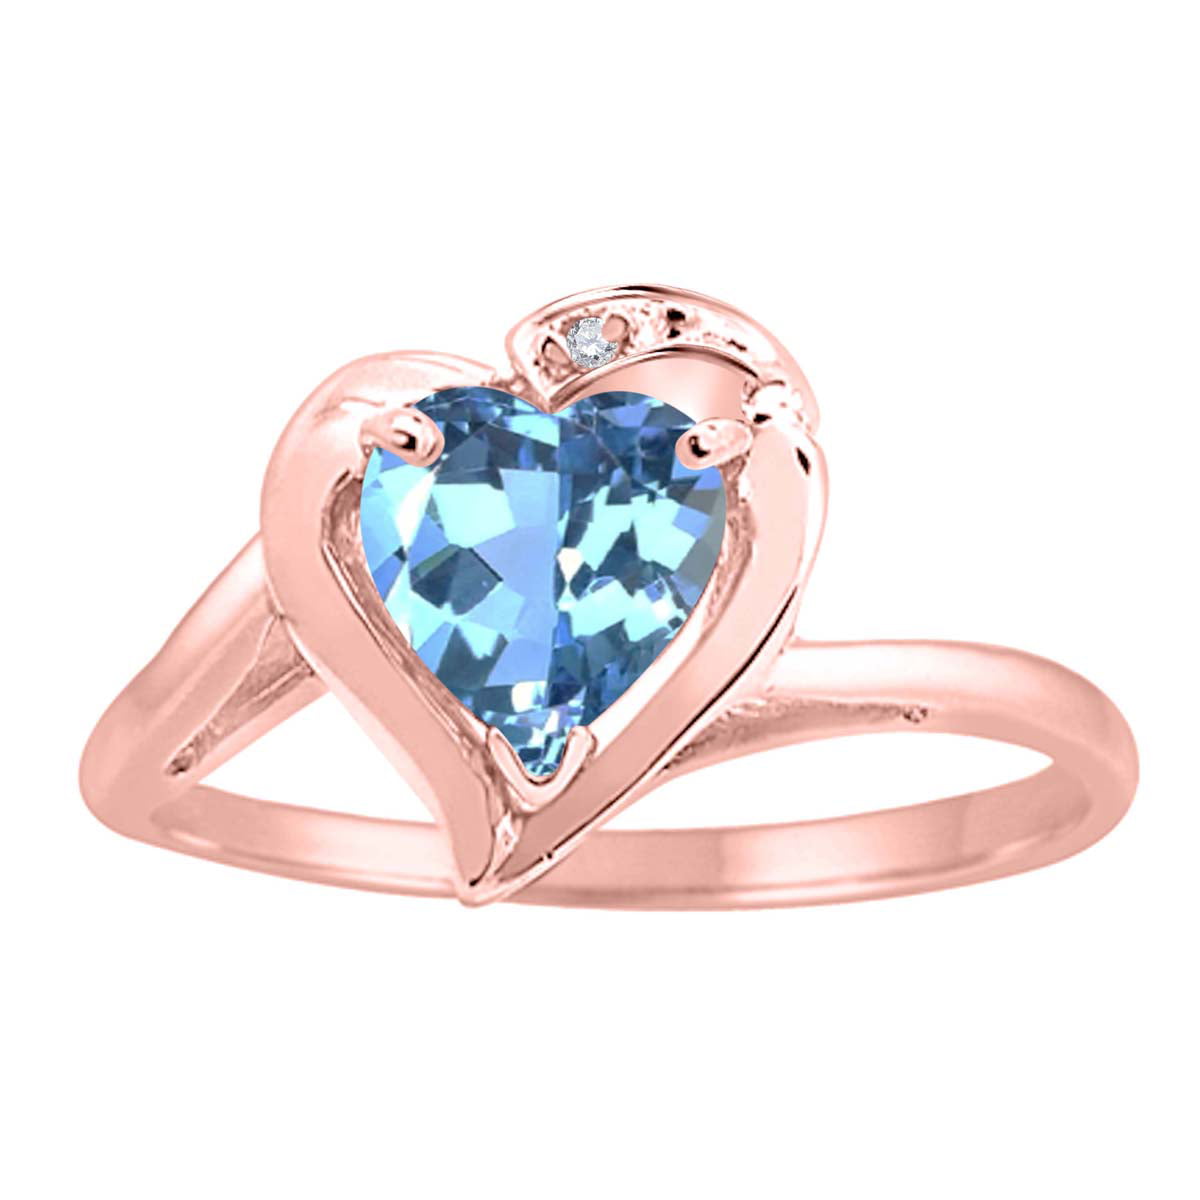 MauliJewels Rings for Women 0.86 Carat Oval Blue Topaz and Diamond Wave Ring prong 10K White Gold Gemstone Wedding Jewelry Collection